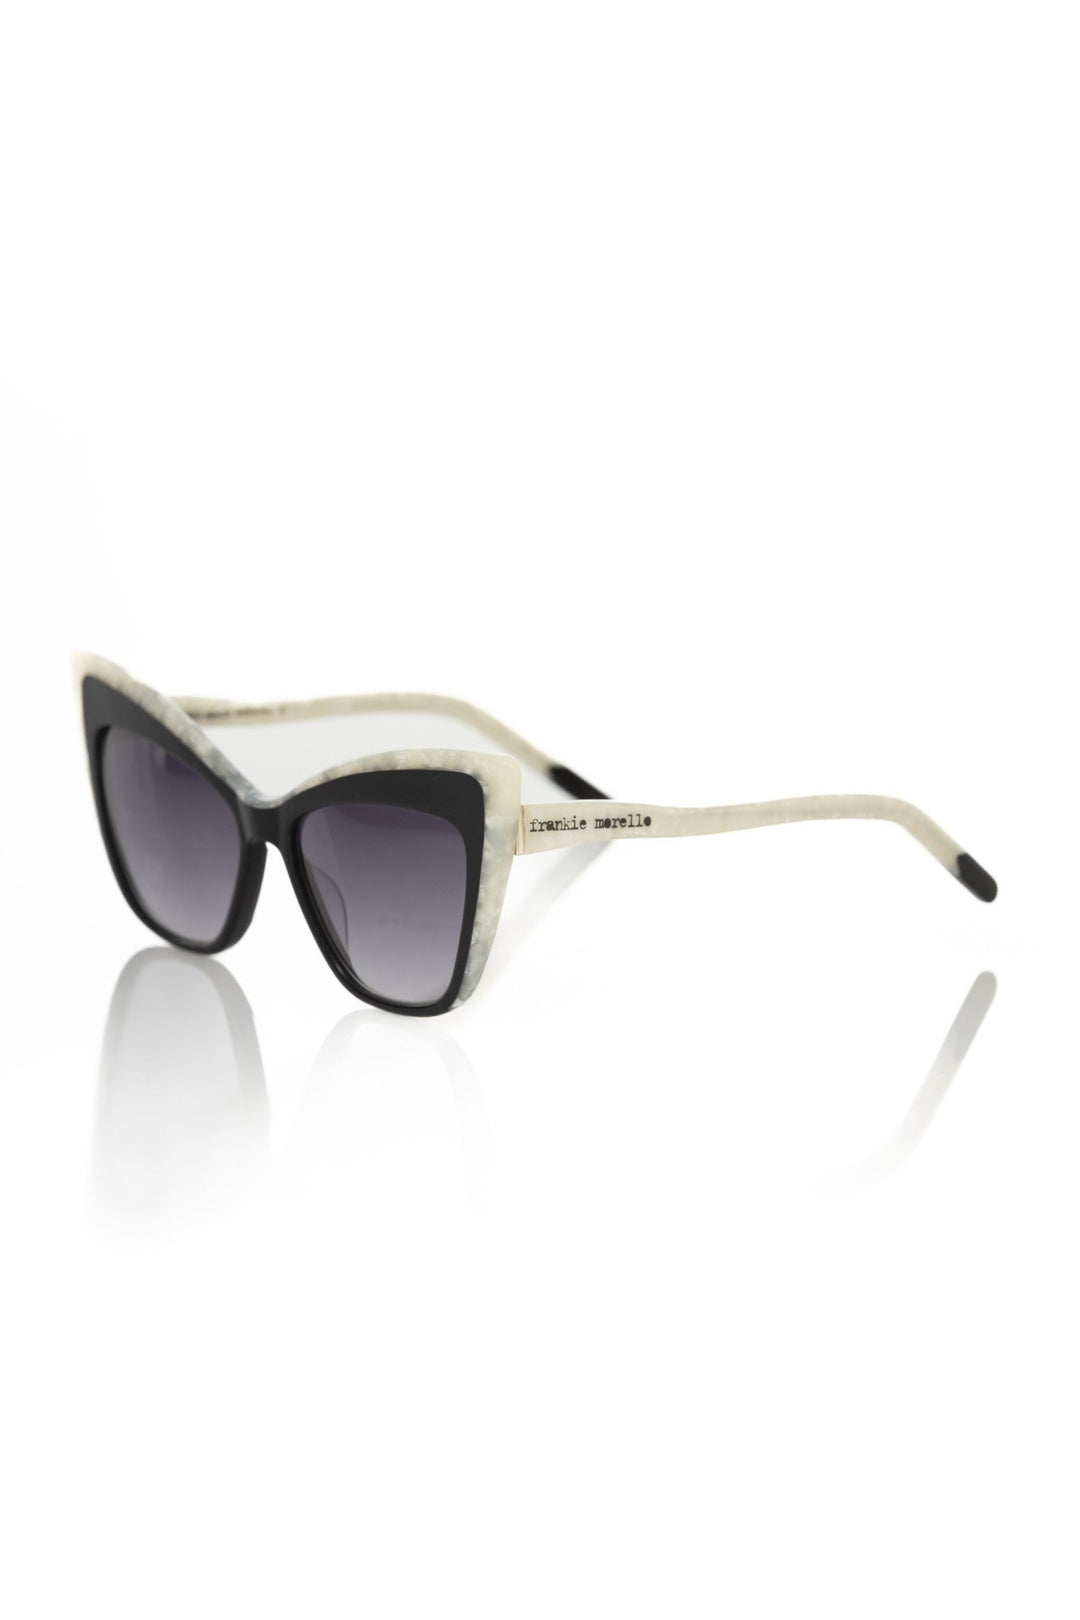 Frankie Morello Chic Cat Eye Sunglasses with Pearly Accents